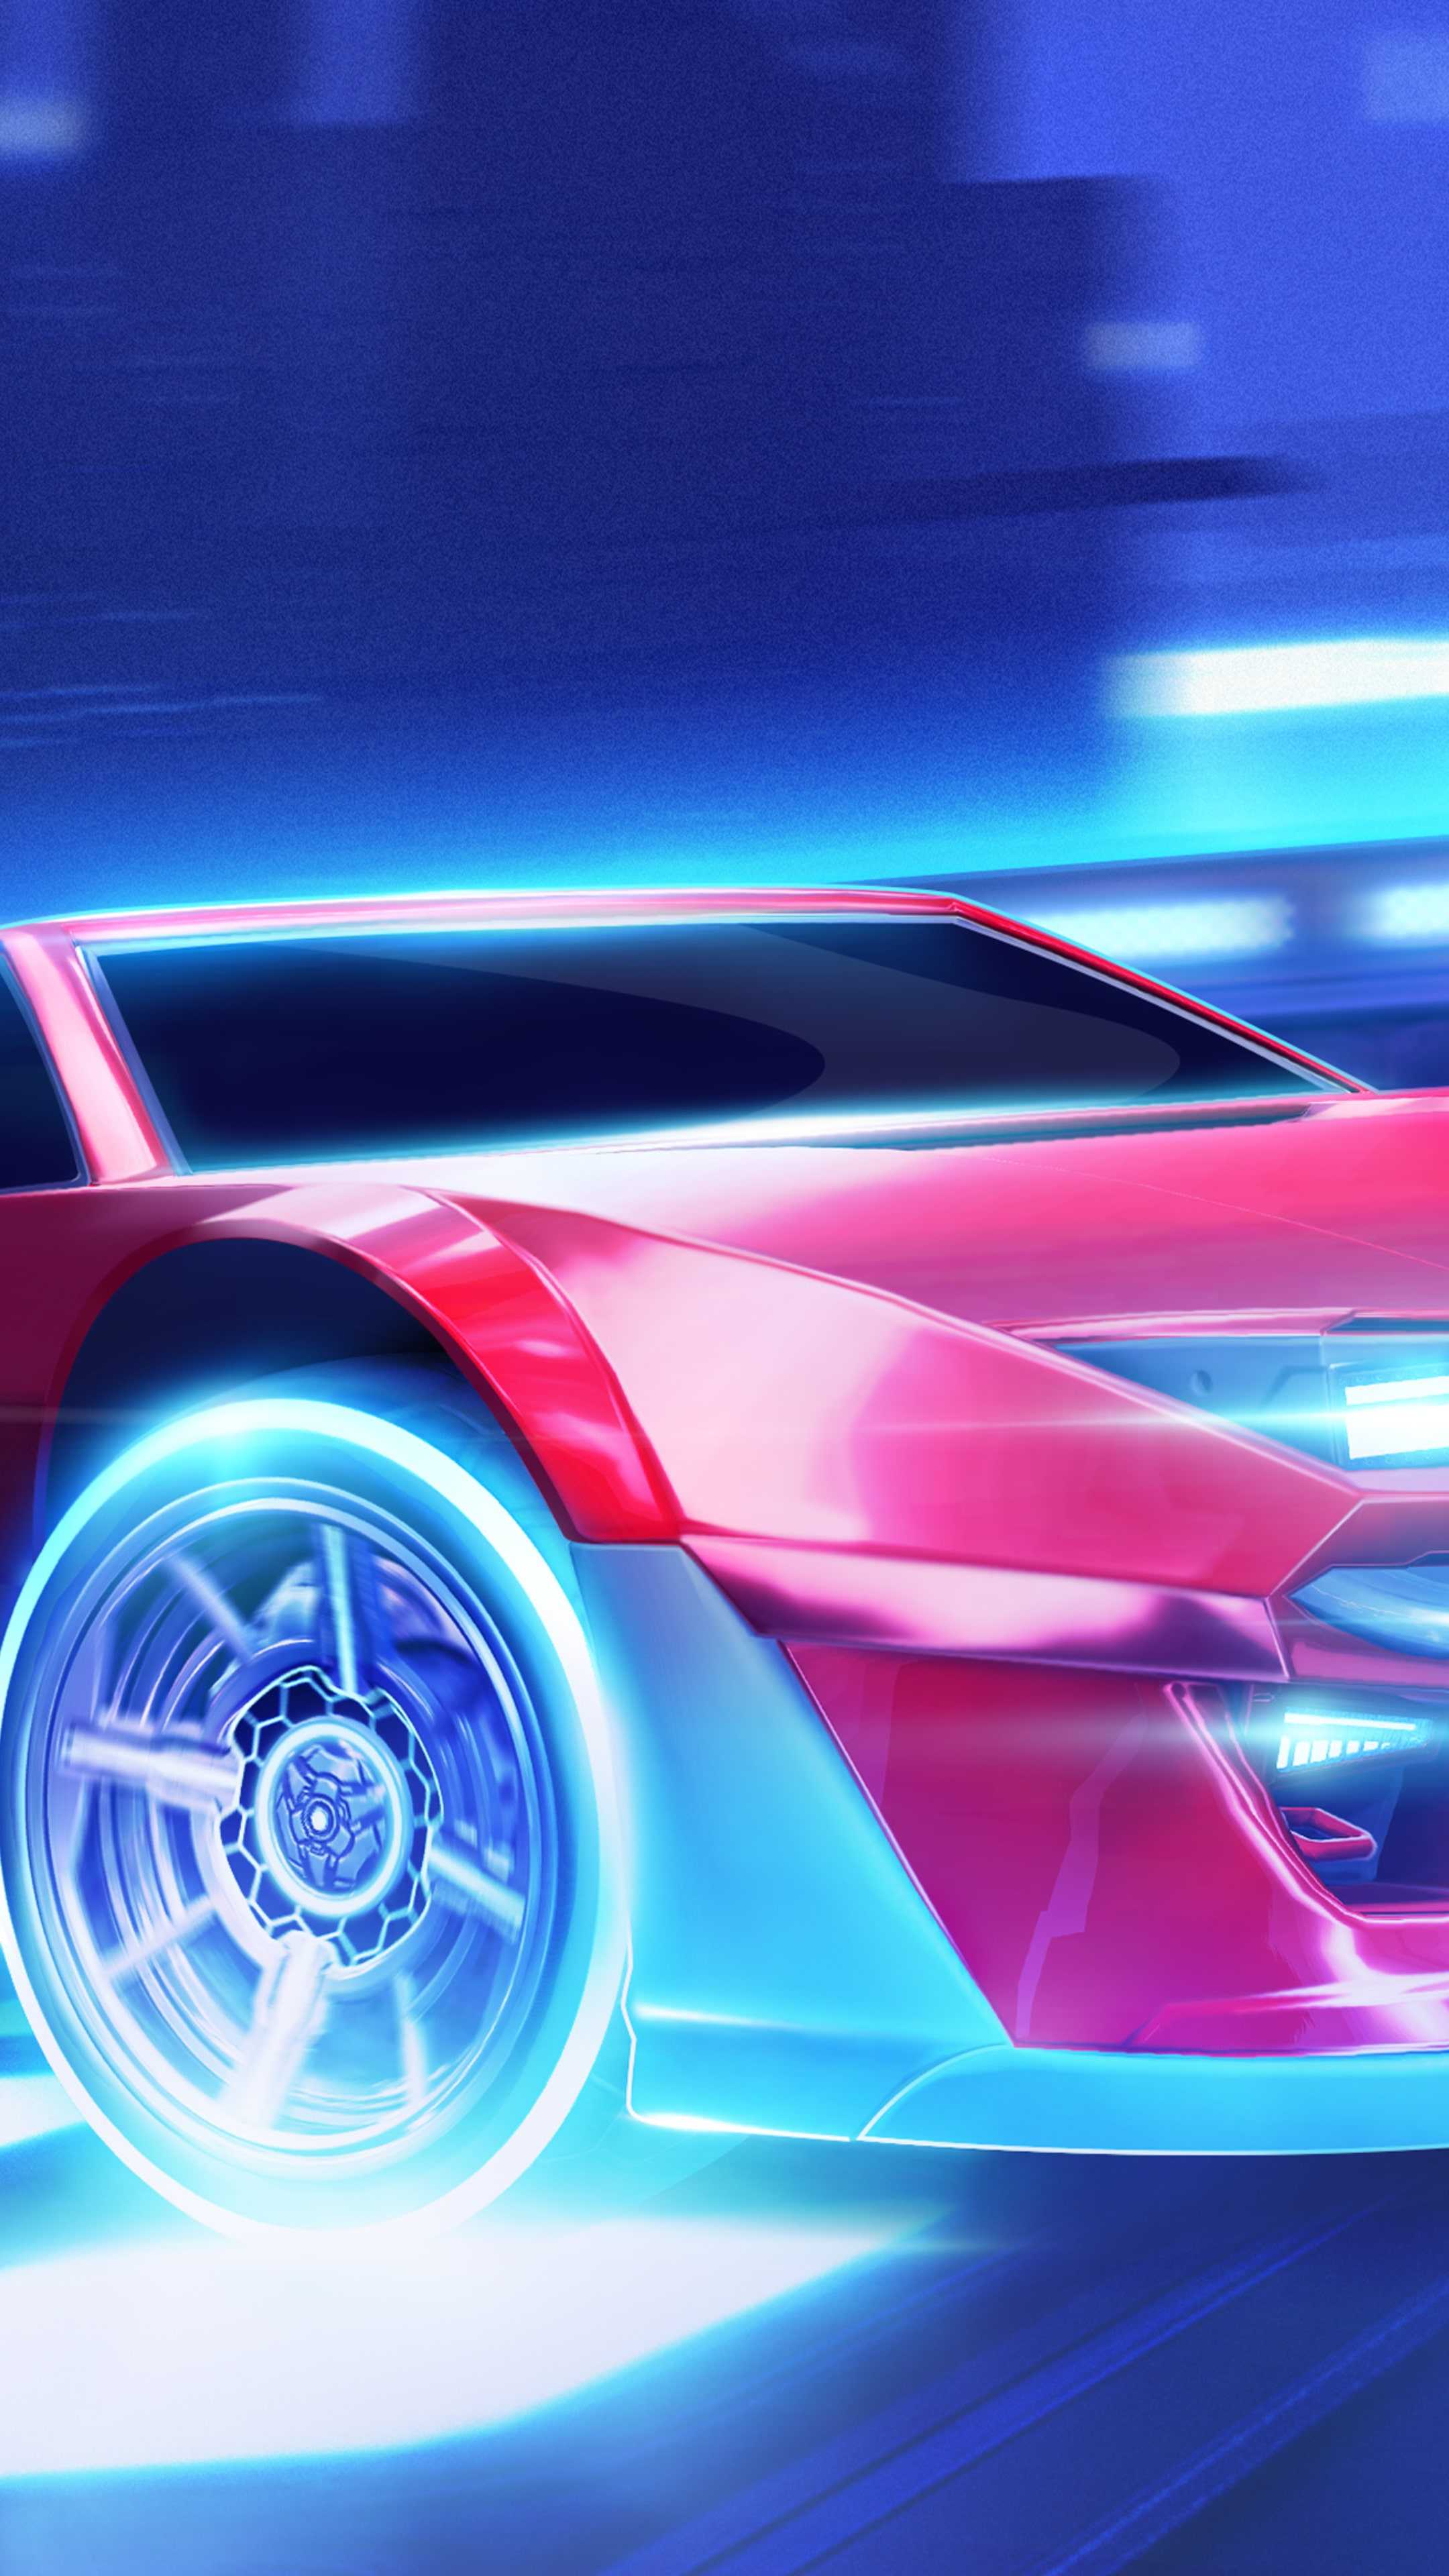 Rocket league wallpaper by gogetaoscuro831 - Download on ZEDGE™ | 7795